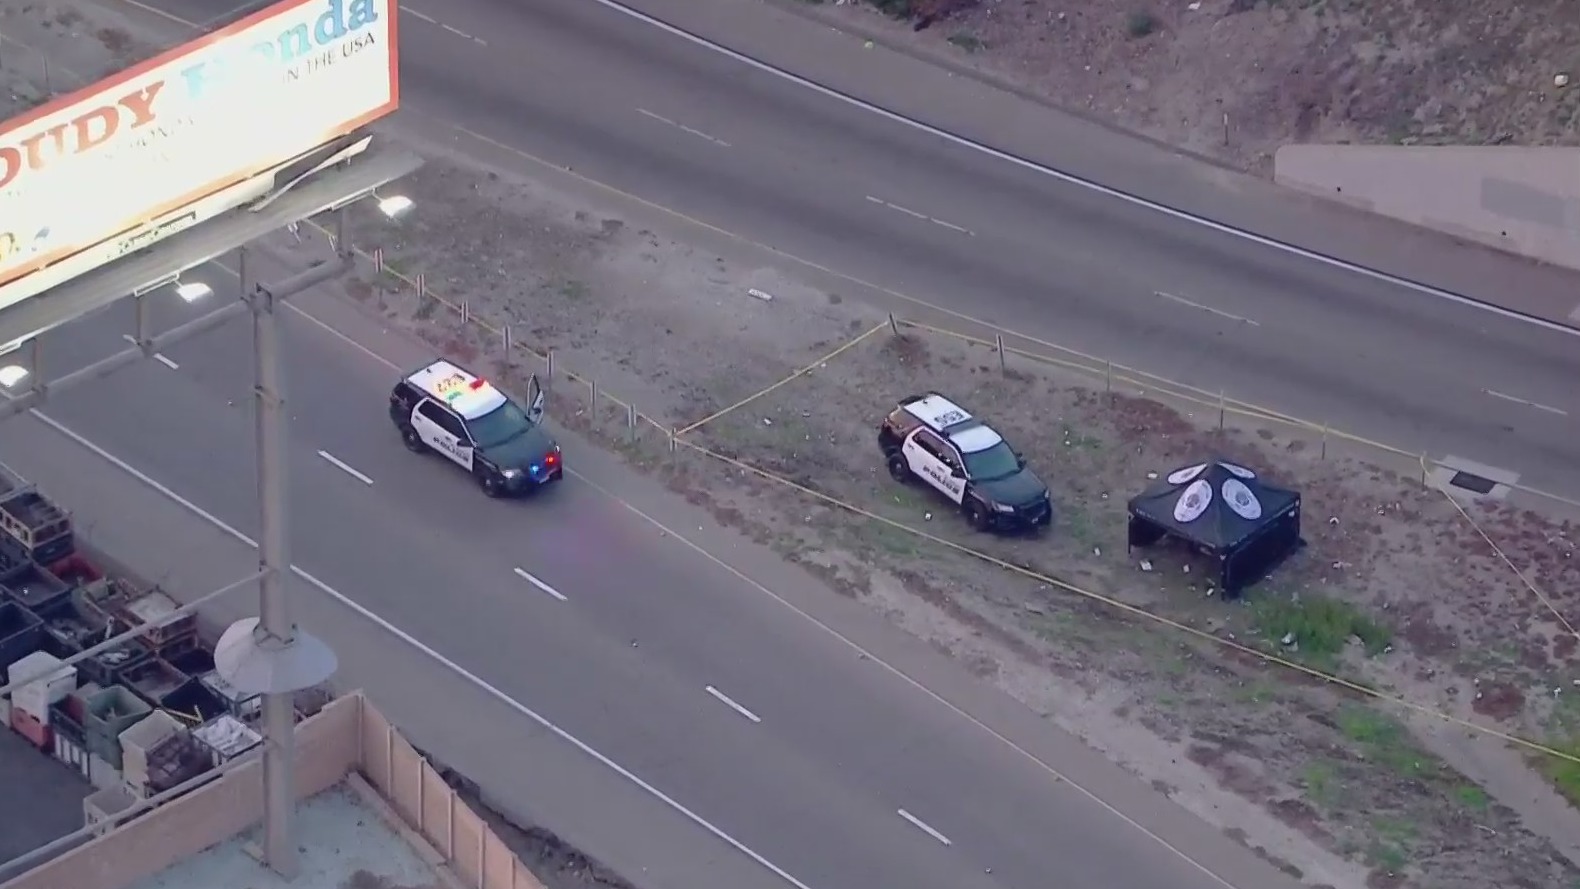 A law enforcement tent sits within the area taped off for investigation after police fatally shot a robbery suspect along the 10 Freeway in El Monte on Feb. 15, 2021. (KTLA)